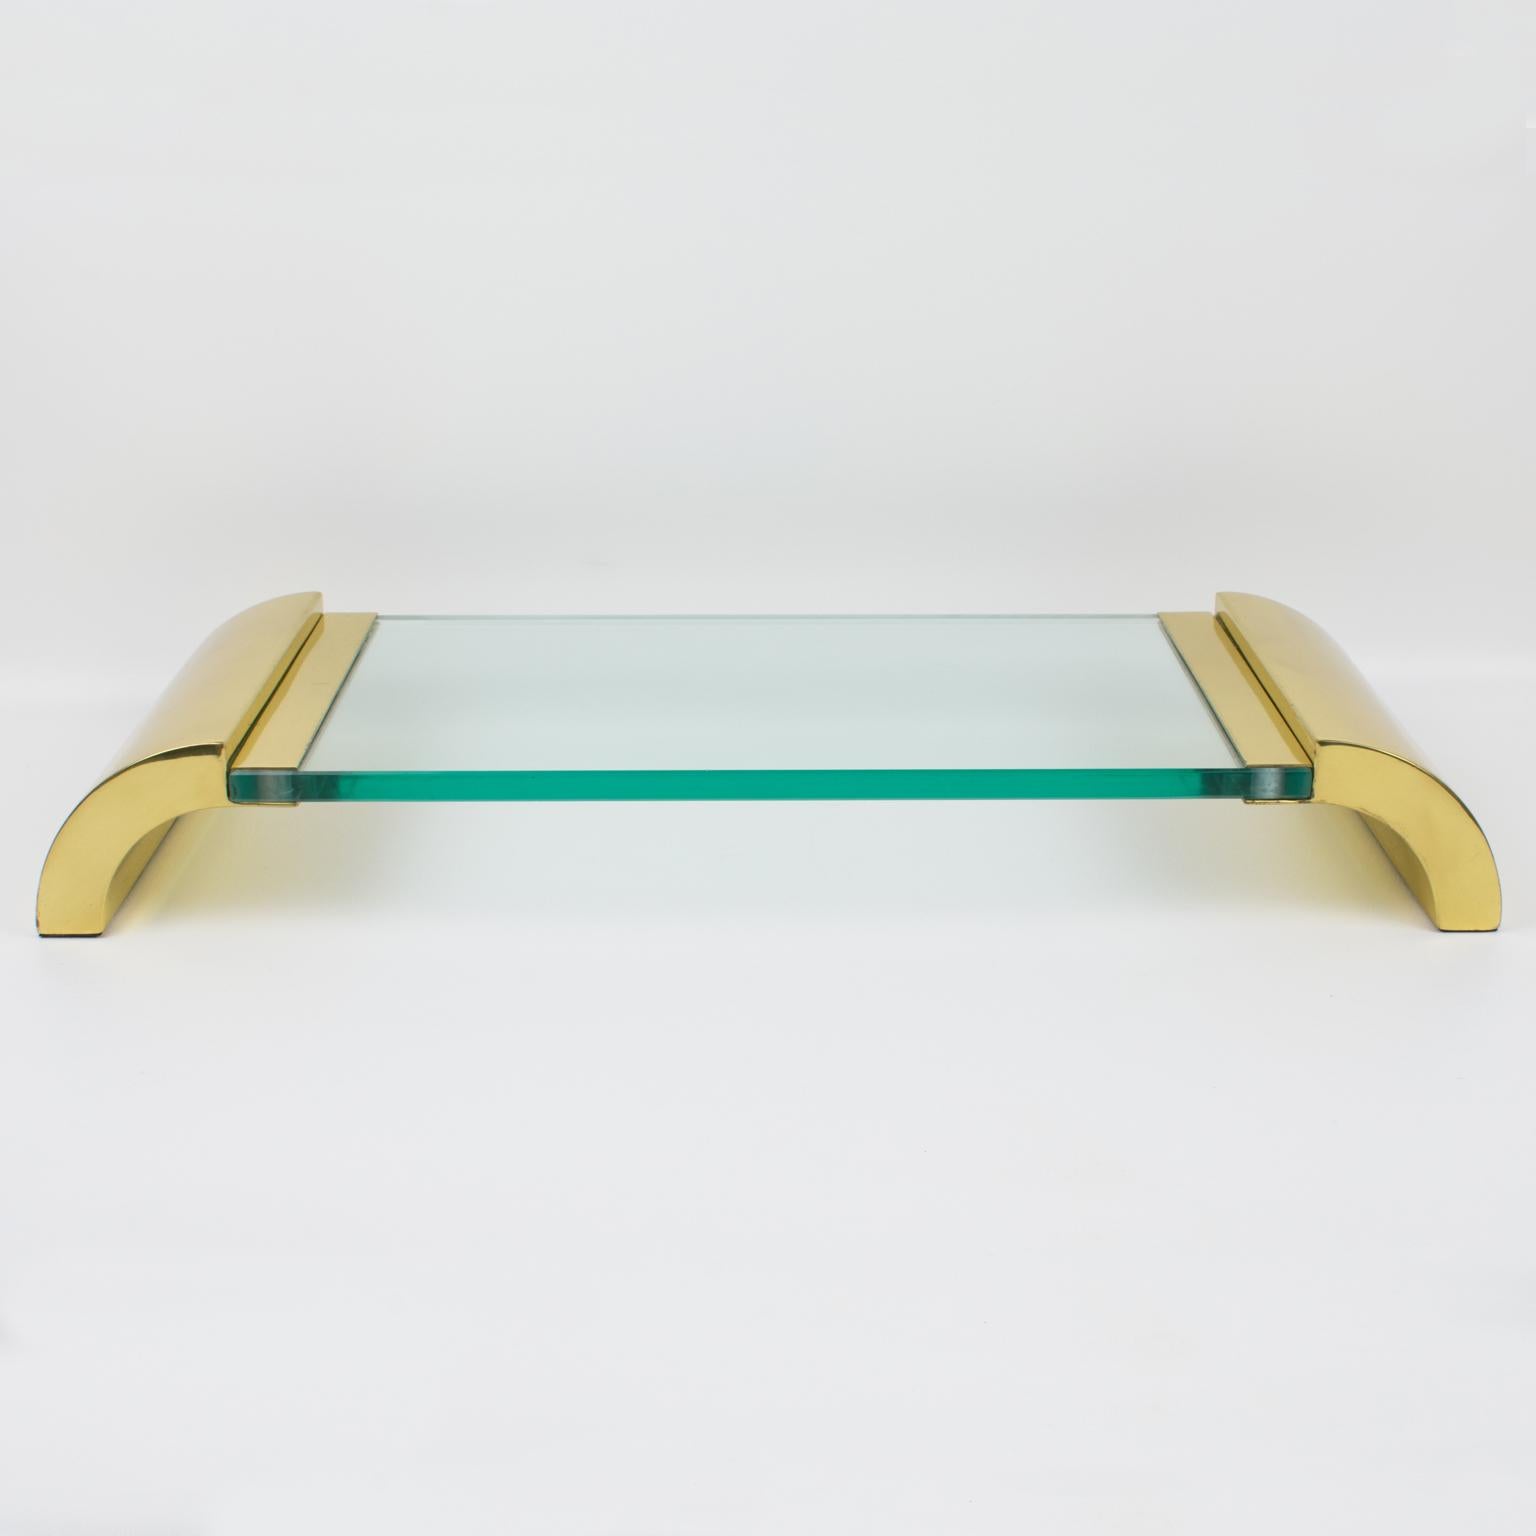 Late 20th Century Modernist Brass and Glass Pedestal Centerpiece Tray, Italy 1980s